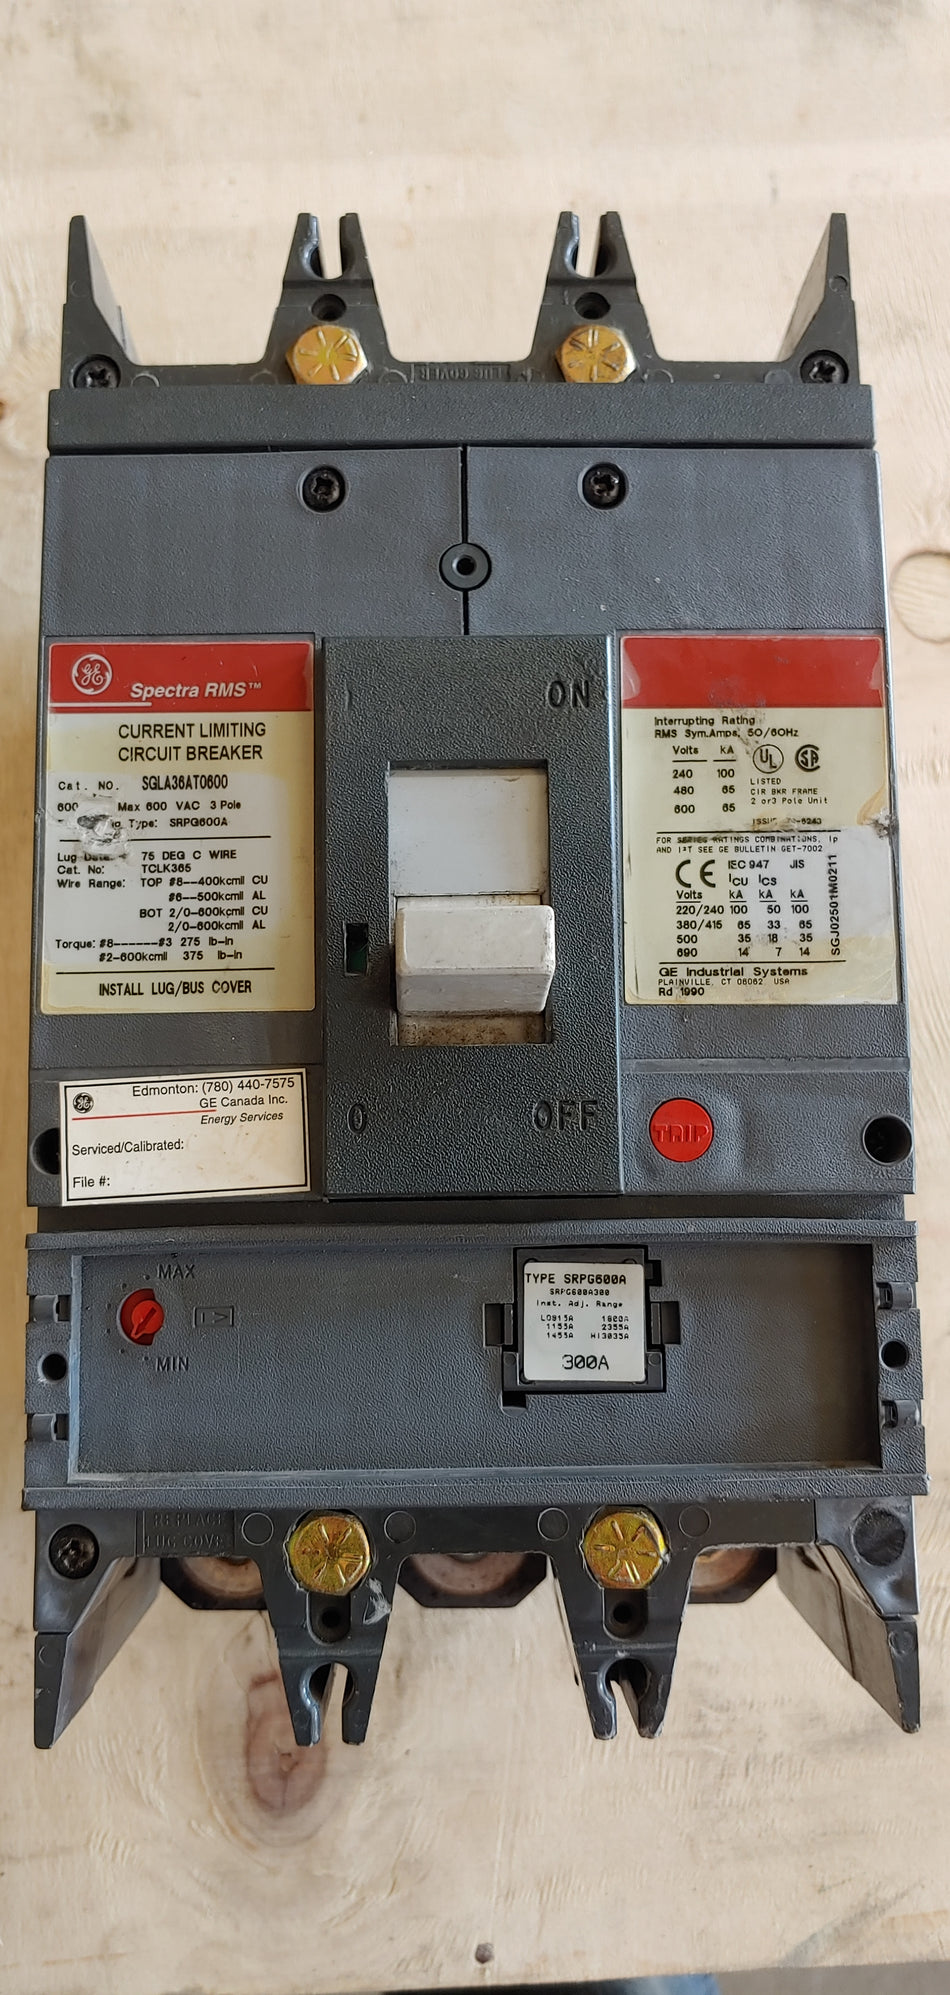 General Electric Spectra RMS Current Limiting Breaker SGLA36AT0600 3 pole 300Amp 600V Max